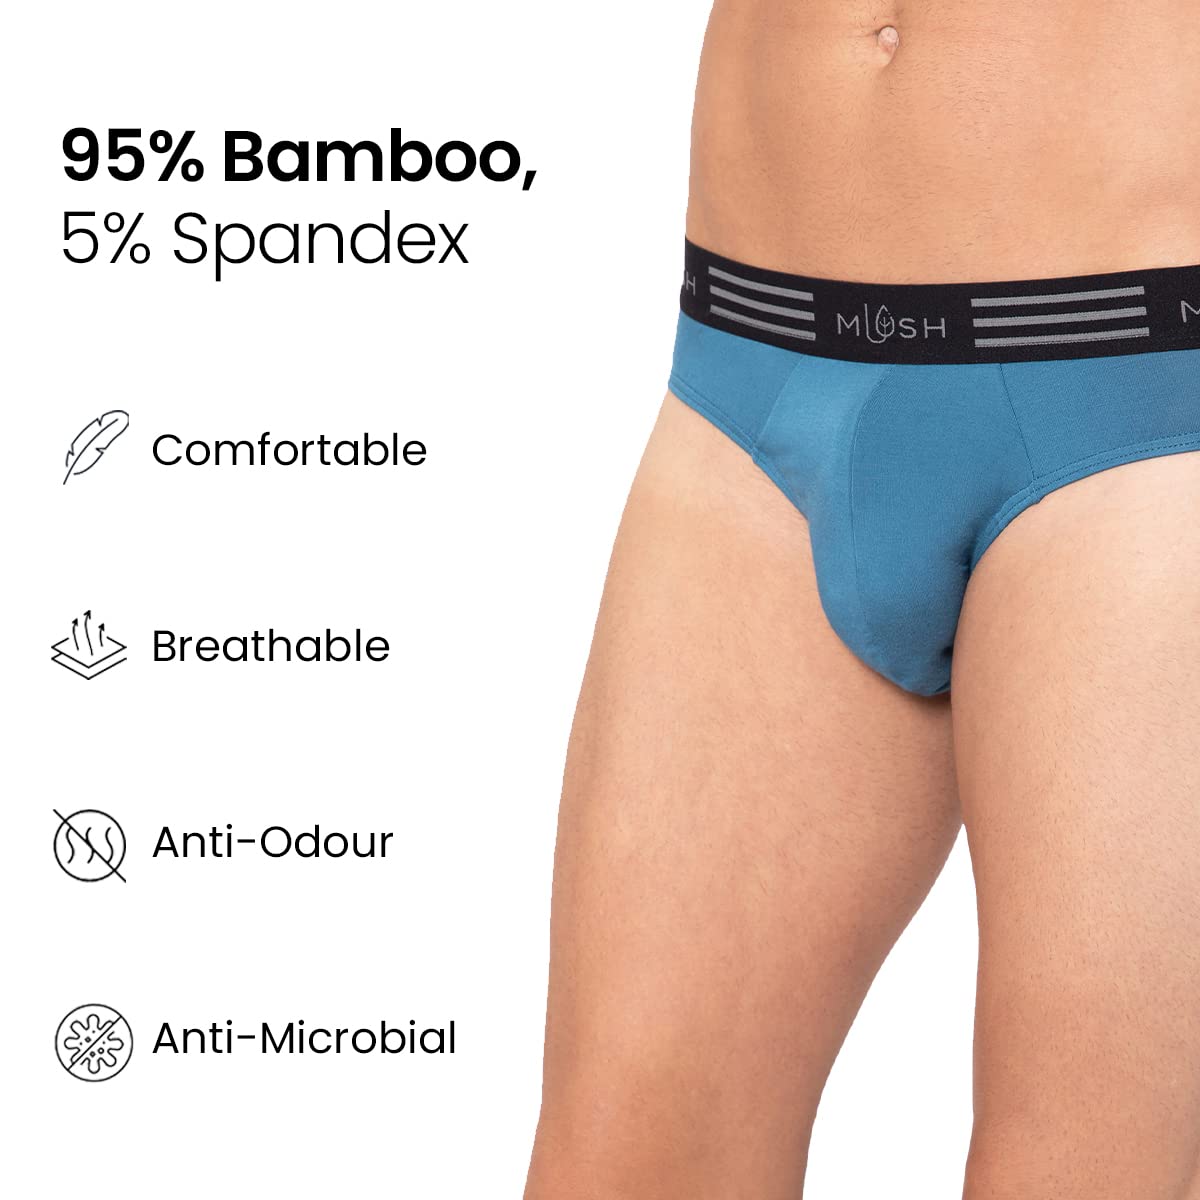 Mush Ultra Soft, Breathable, Feather Light Men's Bamboo Brief || Naturally Anti-Odor and Anti-Microbial Bamboo Innerwear Pack of 3 (XL, Grey Blue and Black)